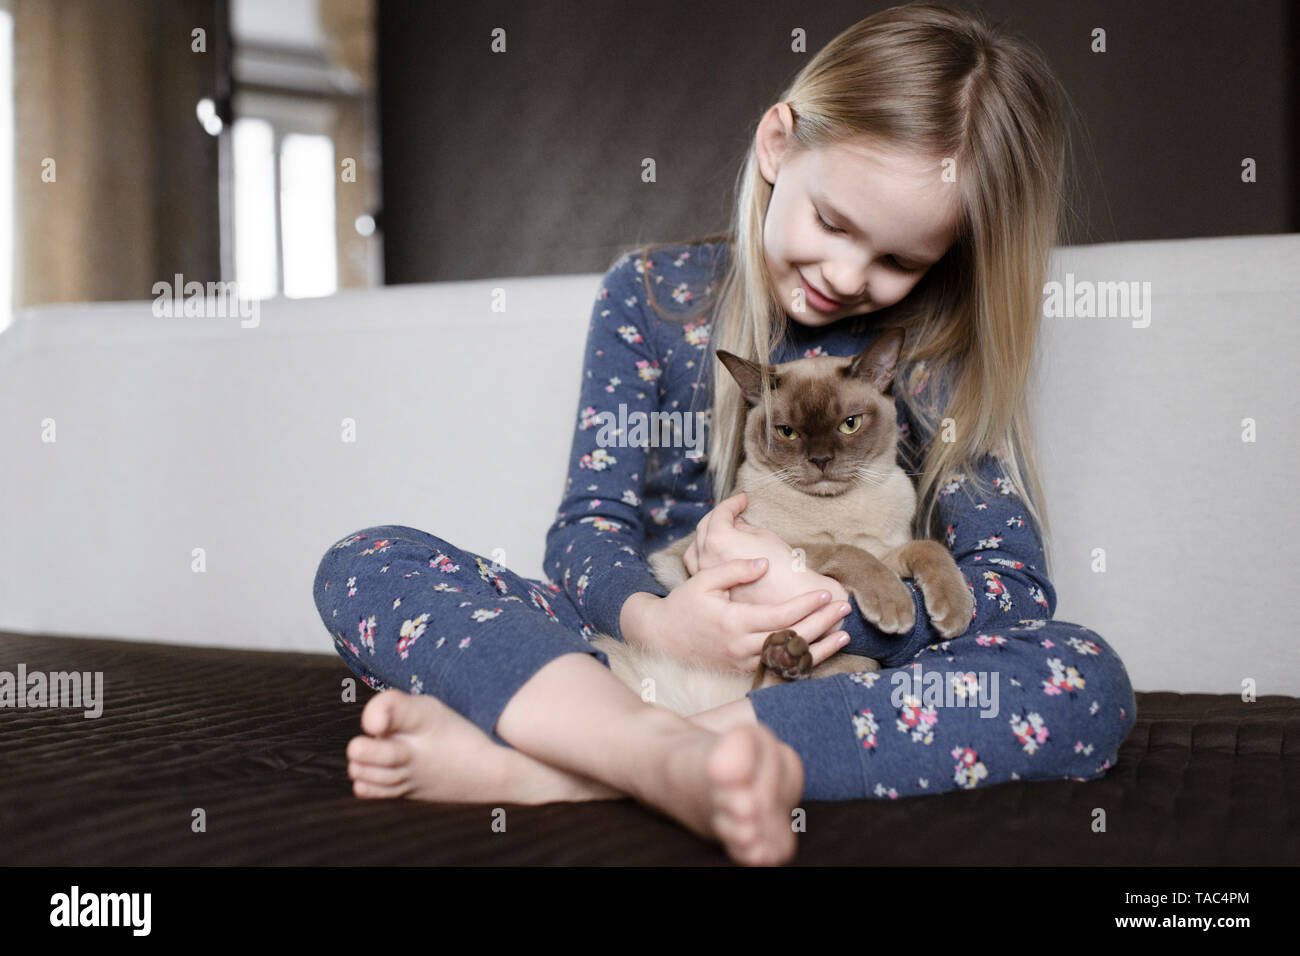 Smiling little girl wearing pyjama with floral design at home holding cat Stock Photo